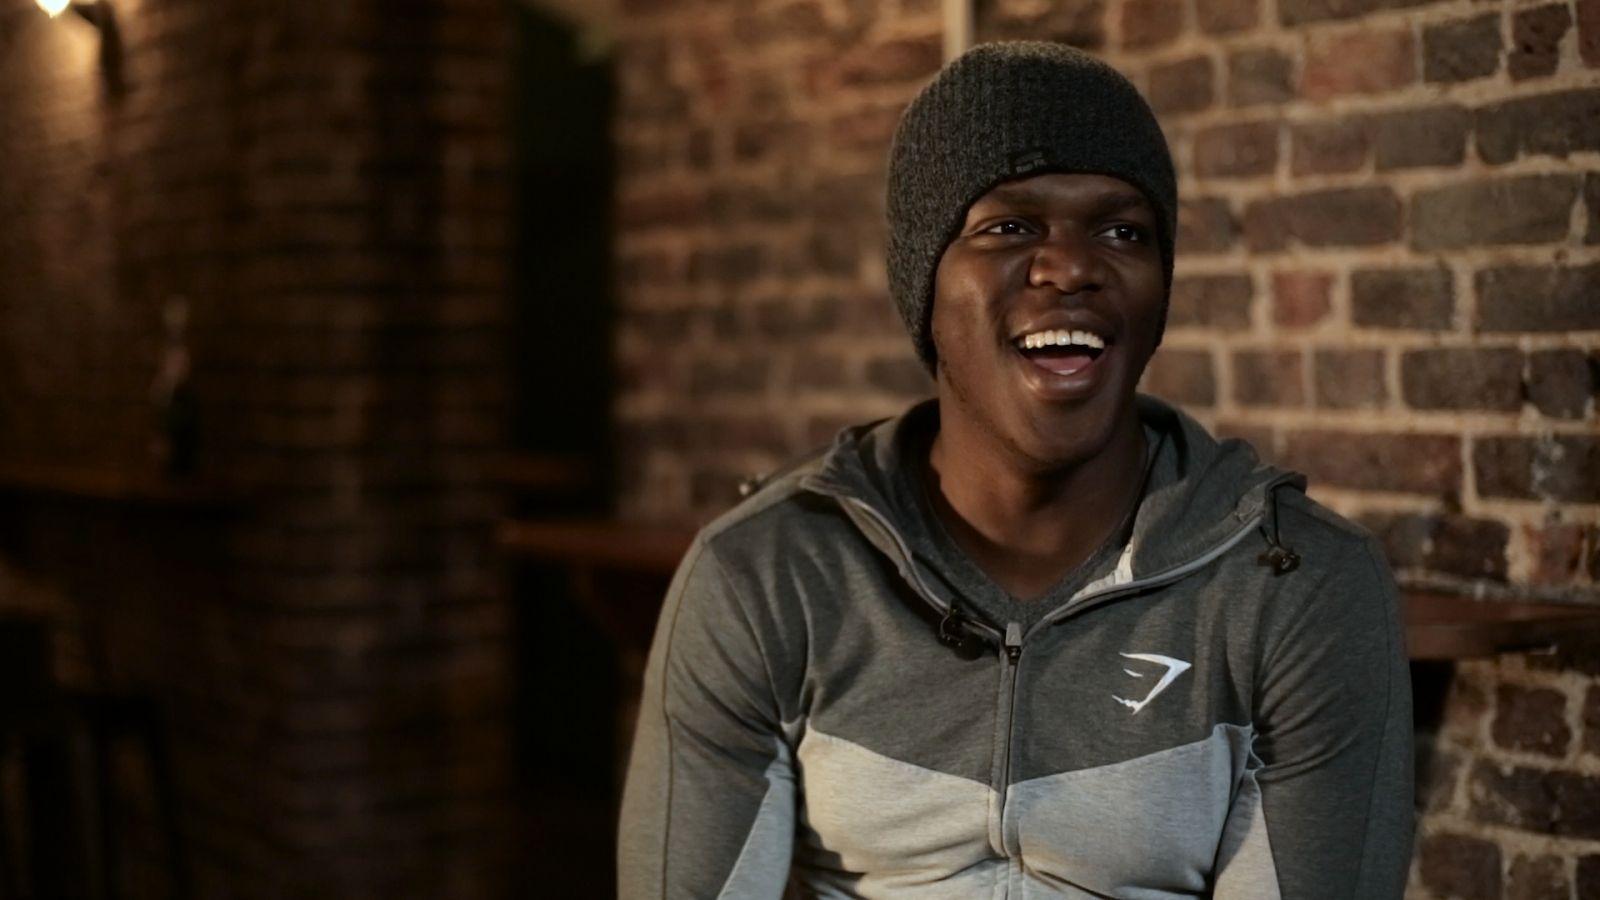 KSI Game on Twitter FREE STUFF Download our free desktop wallpaper  today You know if you like that sort of thingKSI Confirmed  httptcoTWVVqw1gR9  Twitter